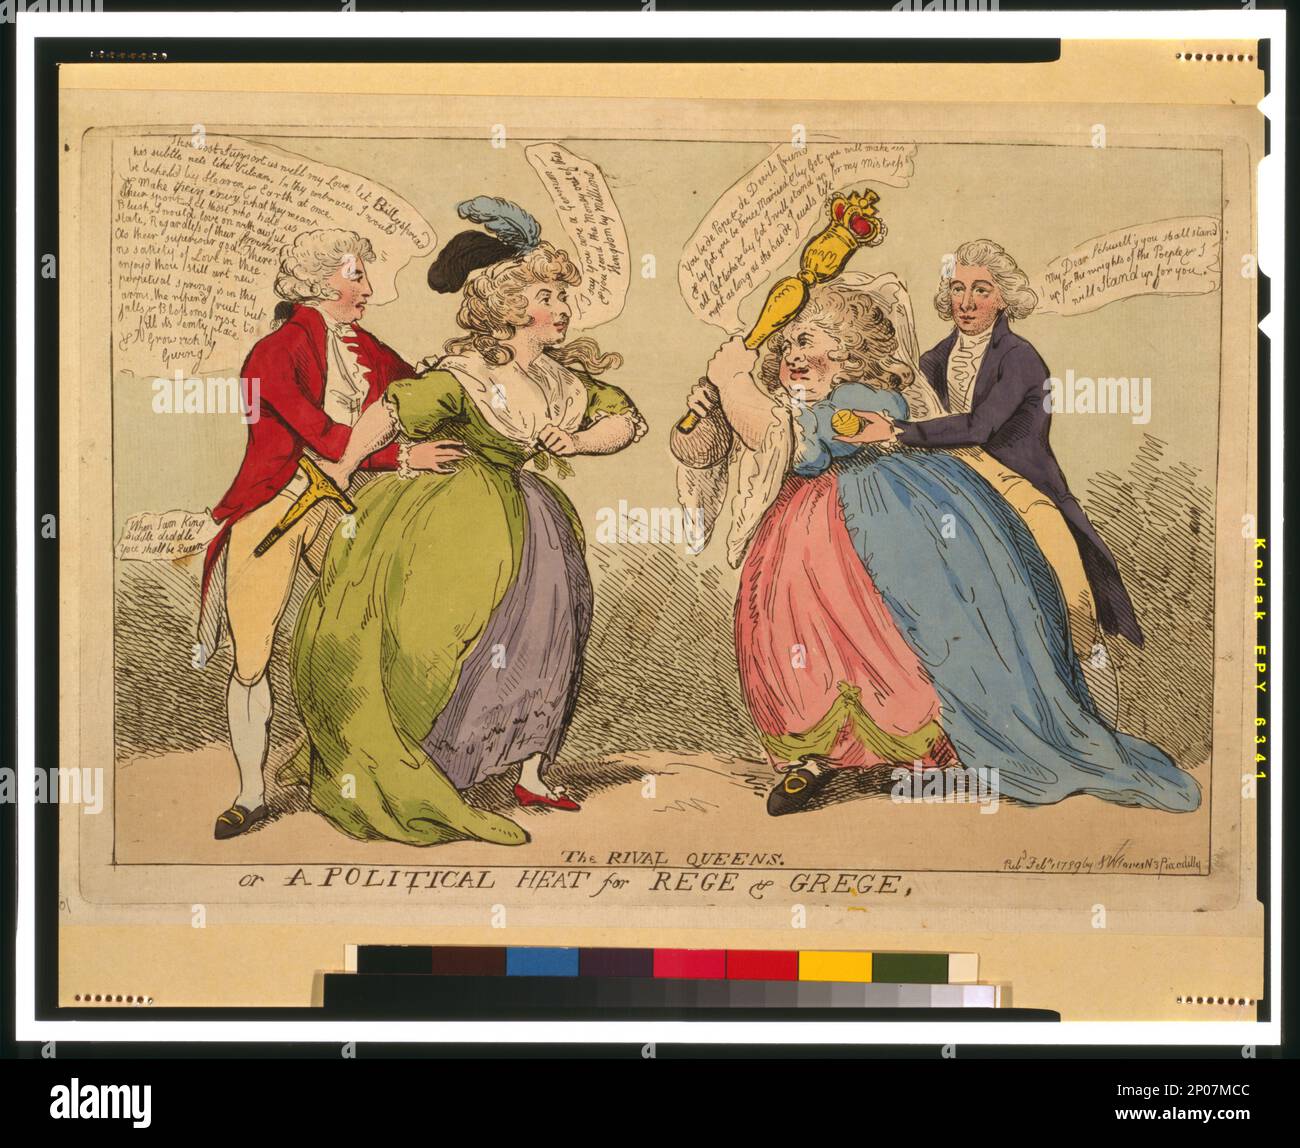 The rival queens or a political heat for Rege & Grege. British Cartoon Prints Collection , Catalogue of prints and drawings in the British Museum. Division I, political and personal satires, v. 6, no. 7501. Fitzherbert, Maria Anne,1756-1837. , Queens,Great Britain,1780-1790. Stock Photo